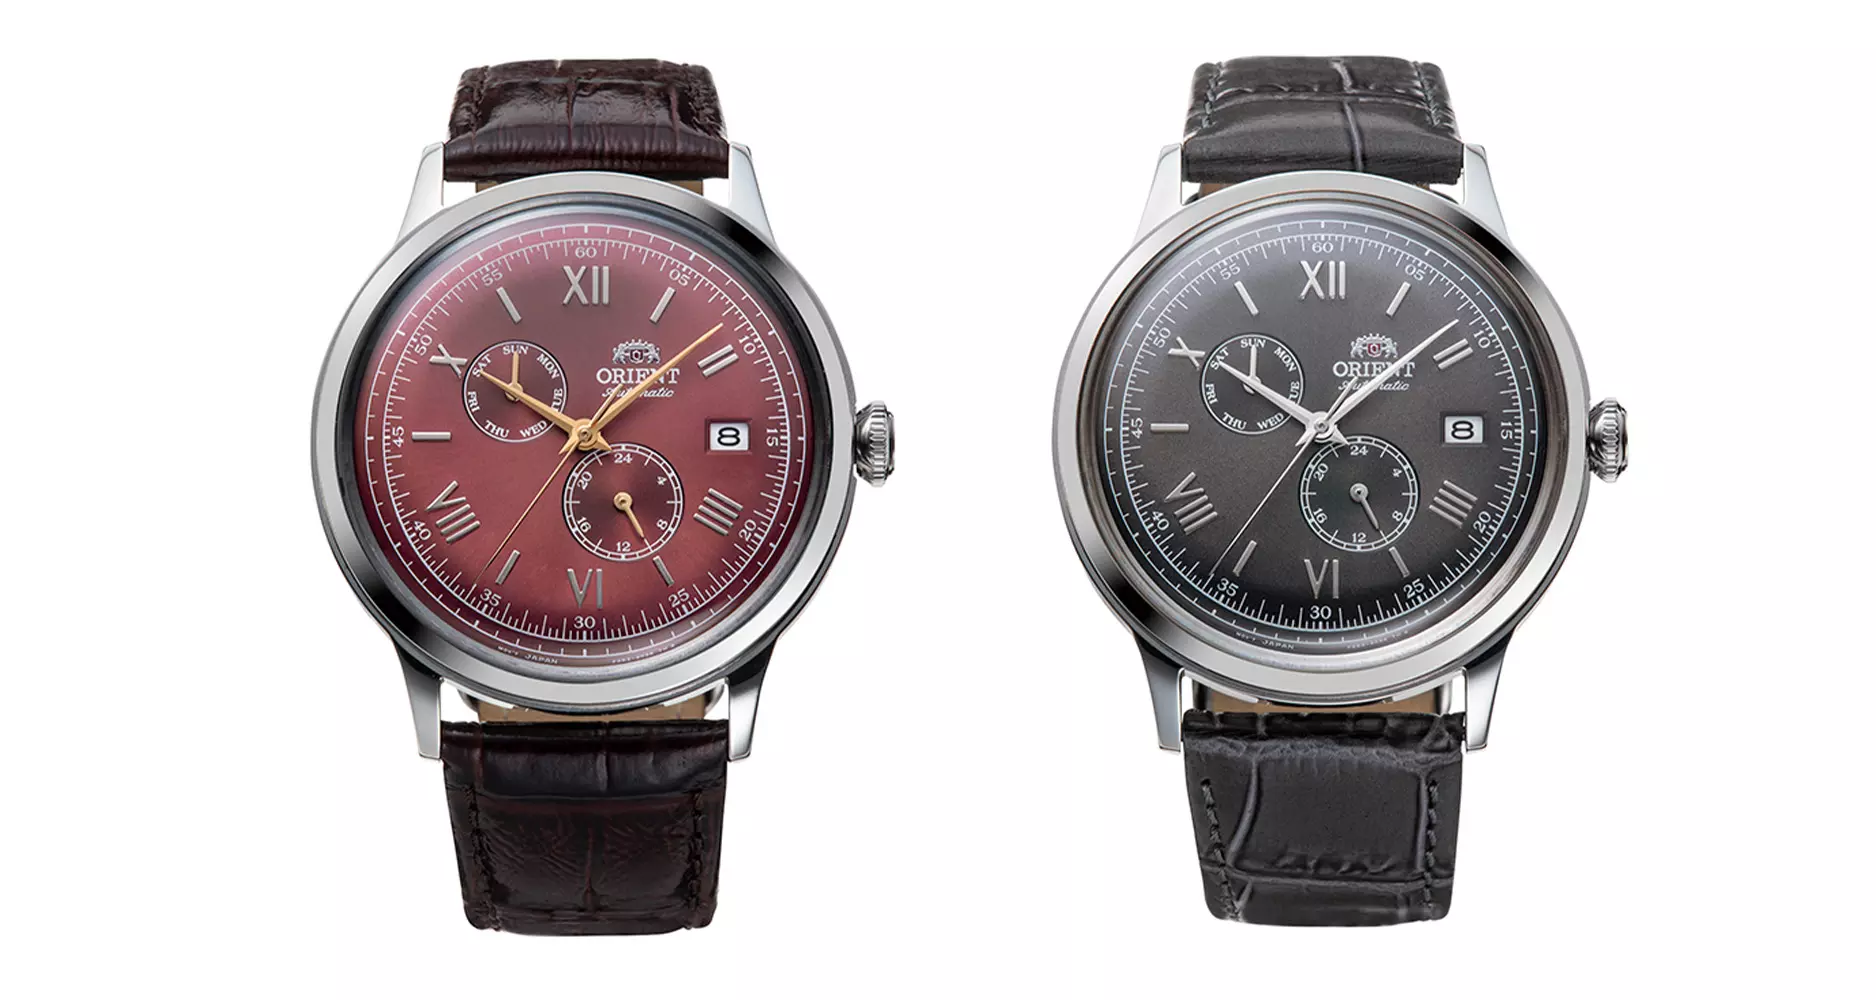 The new Orient Bambino Day-Date and 24H models in red and anthracite dials.